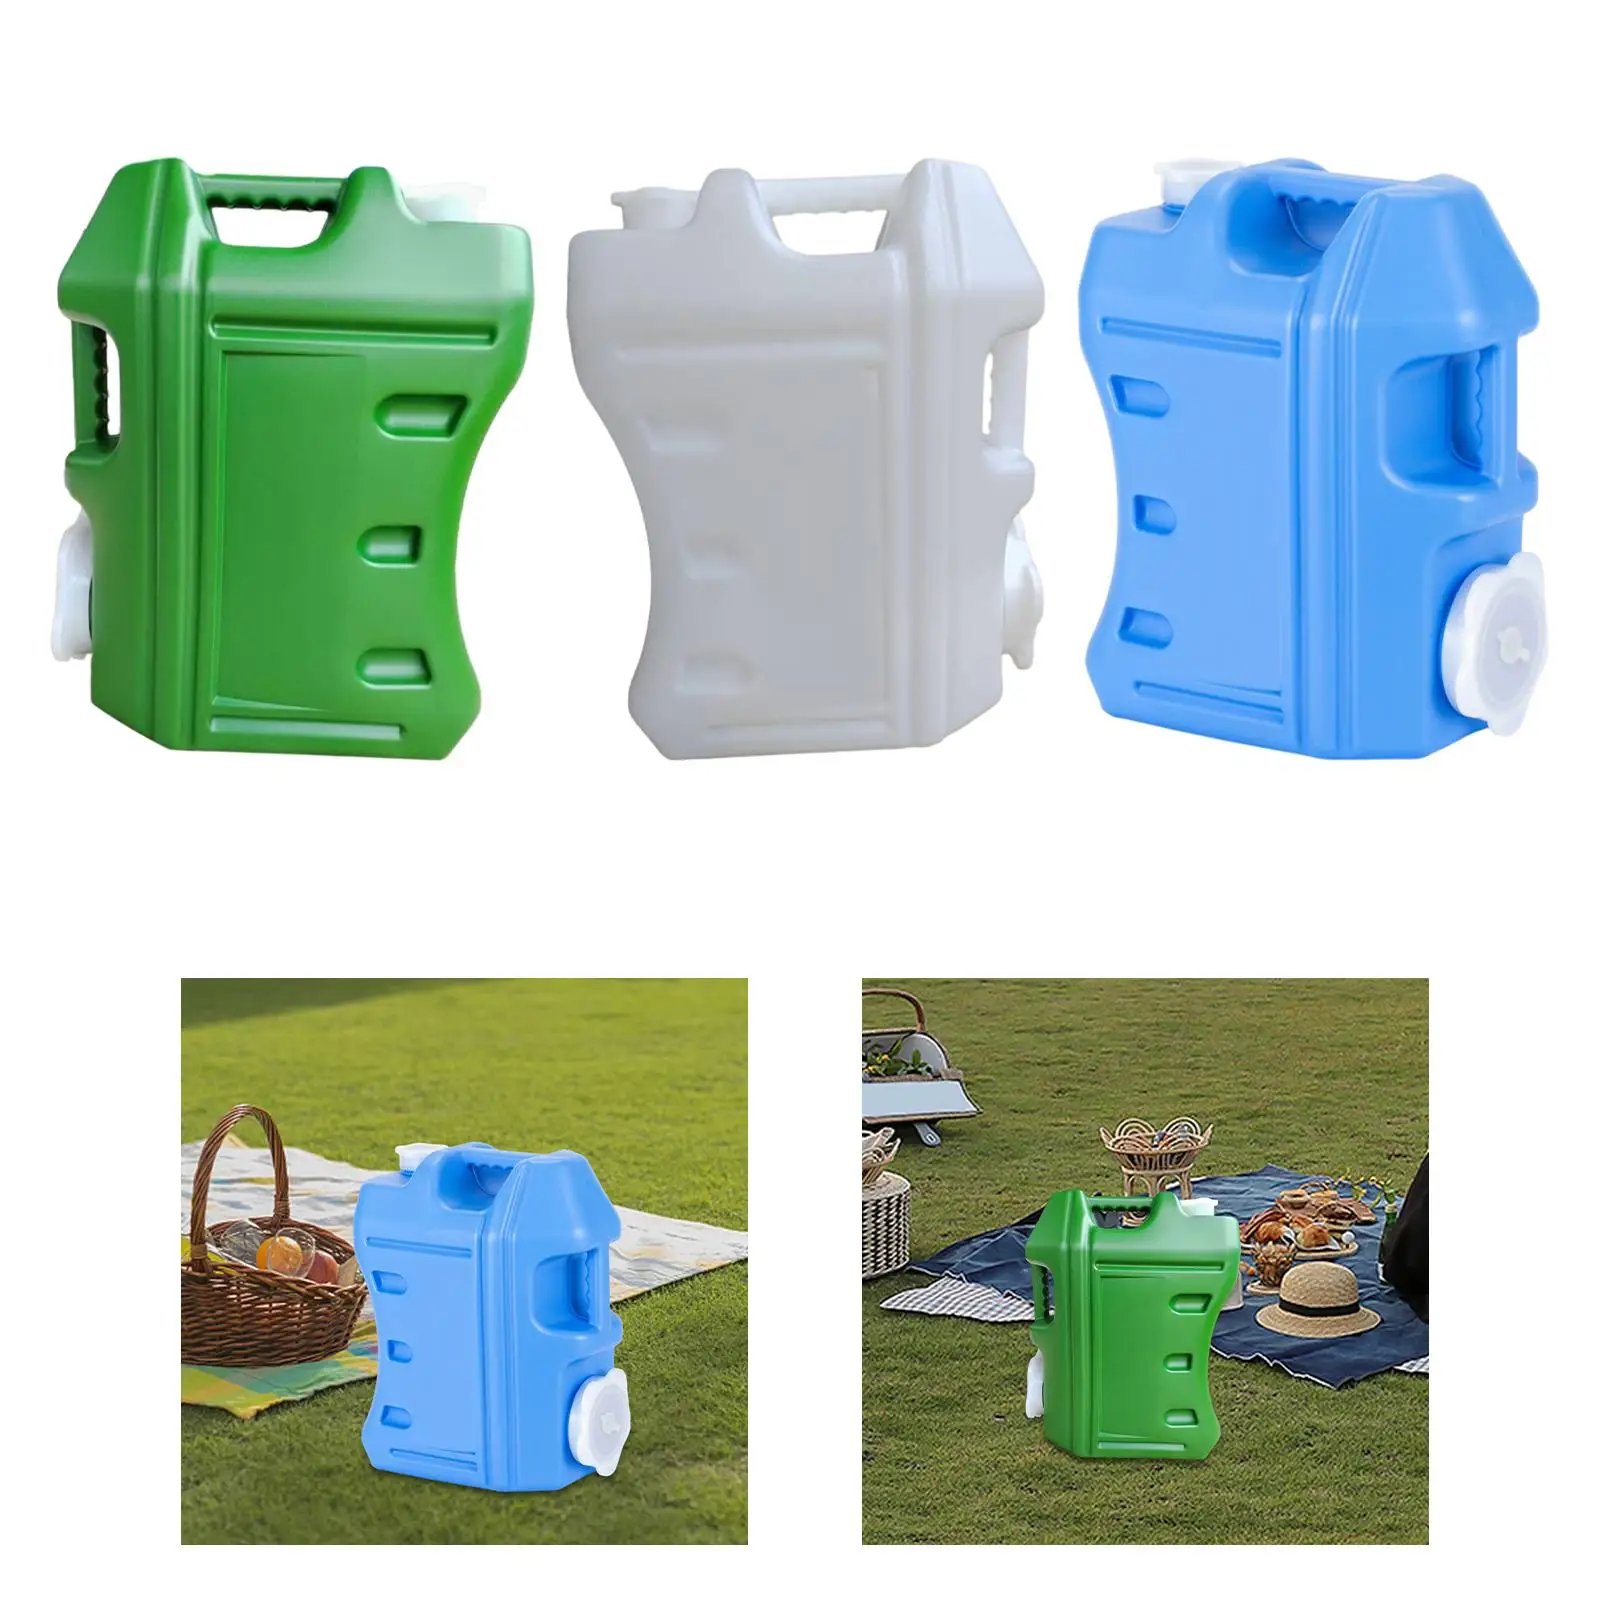 Portable Water Container Water Tank Water Storage Container Water Barrel for Camping Household Outdoor Self Driving Tour Bath